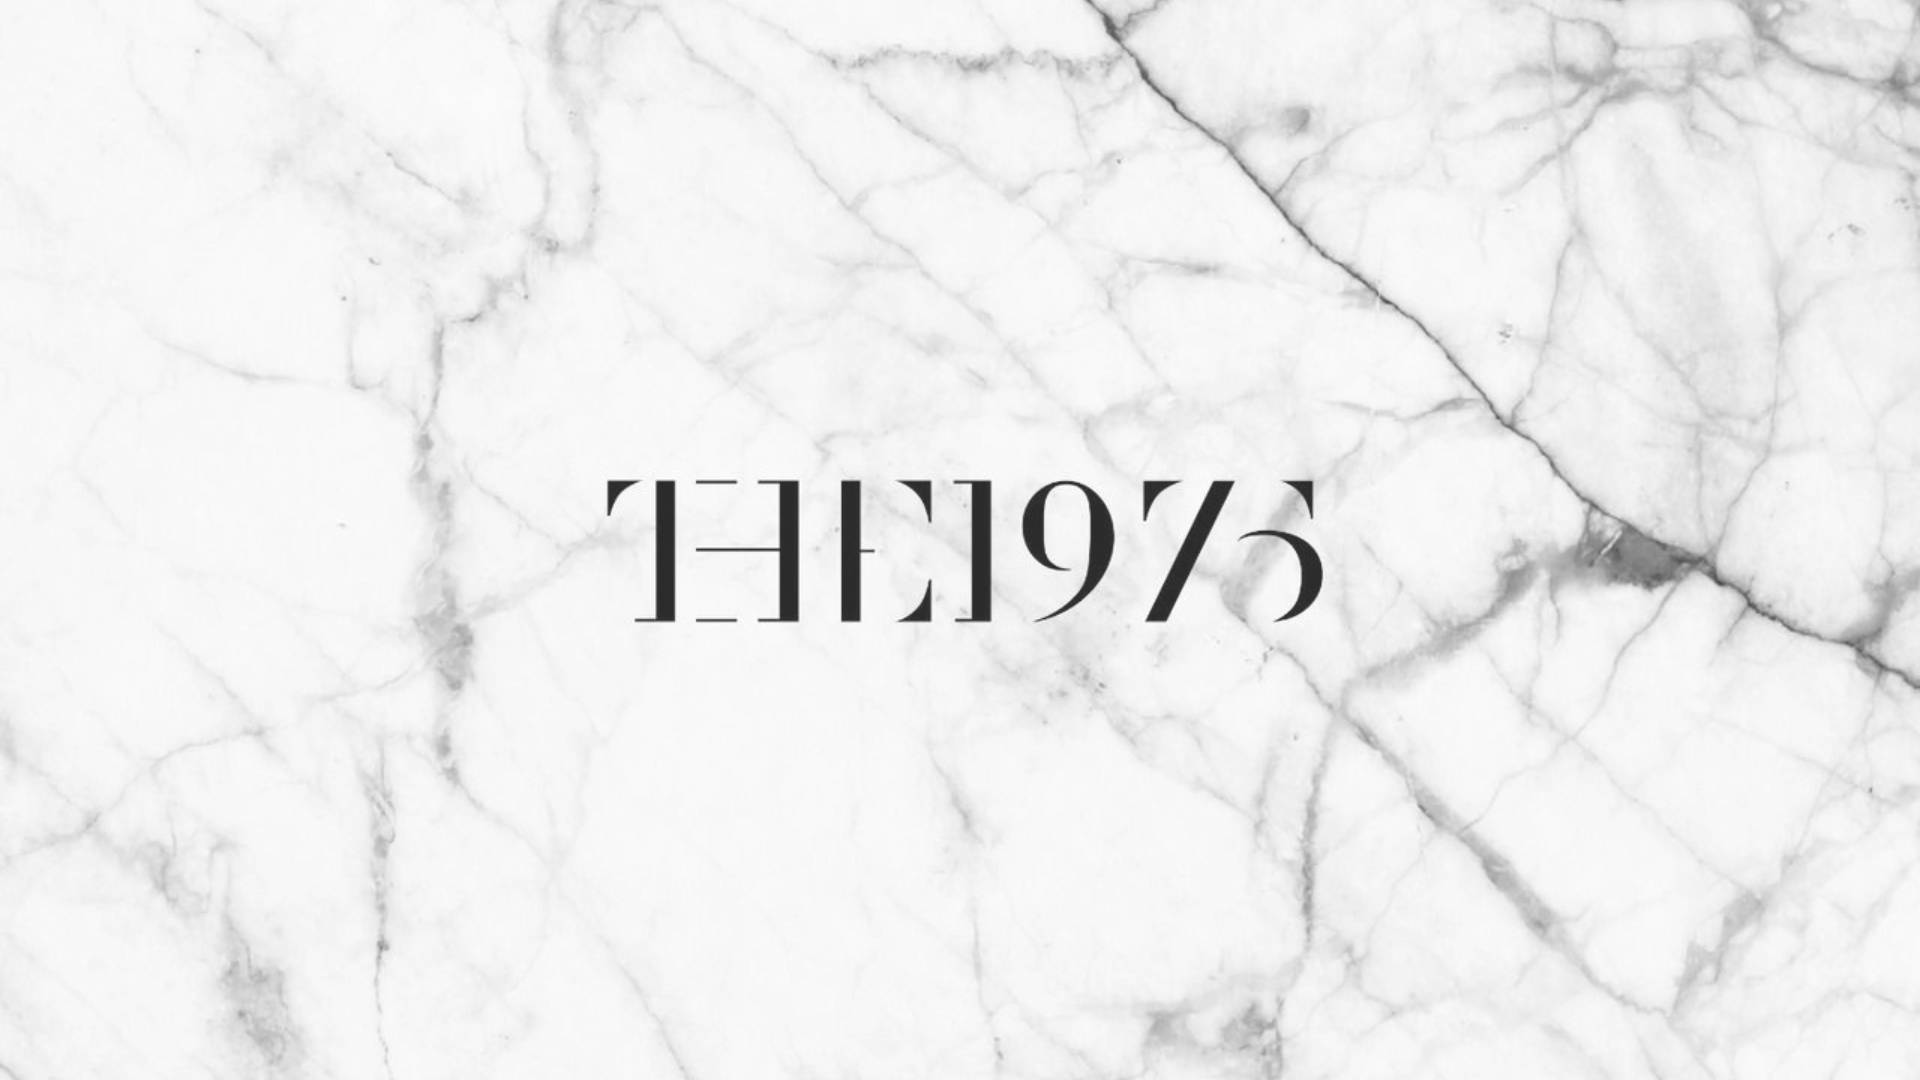 The 1975 On White Marble Background